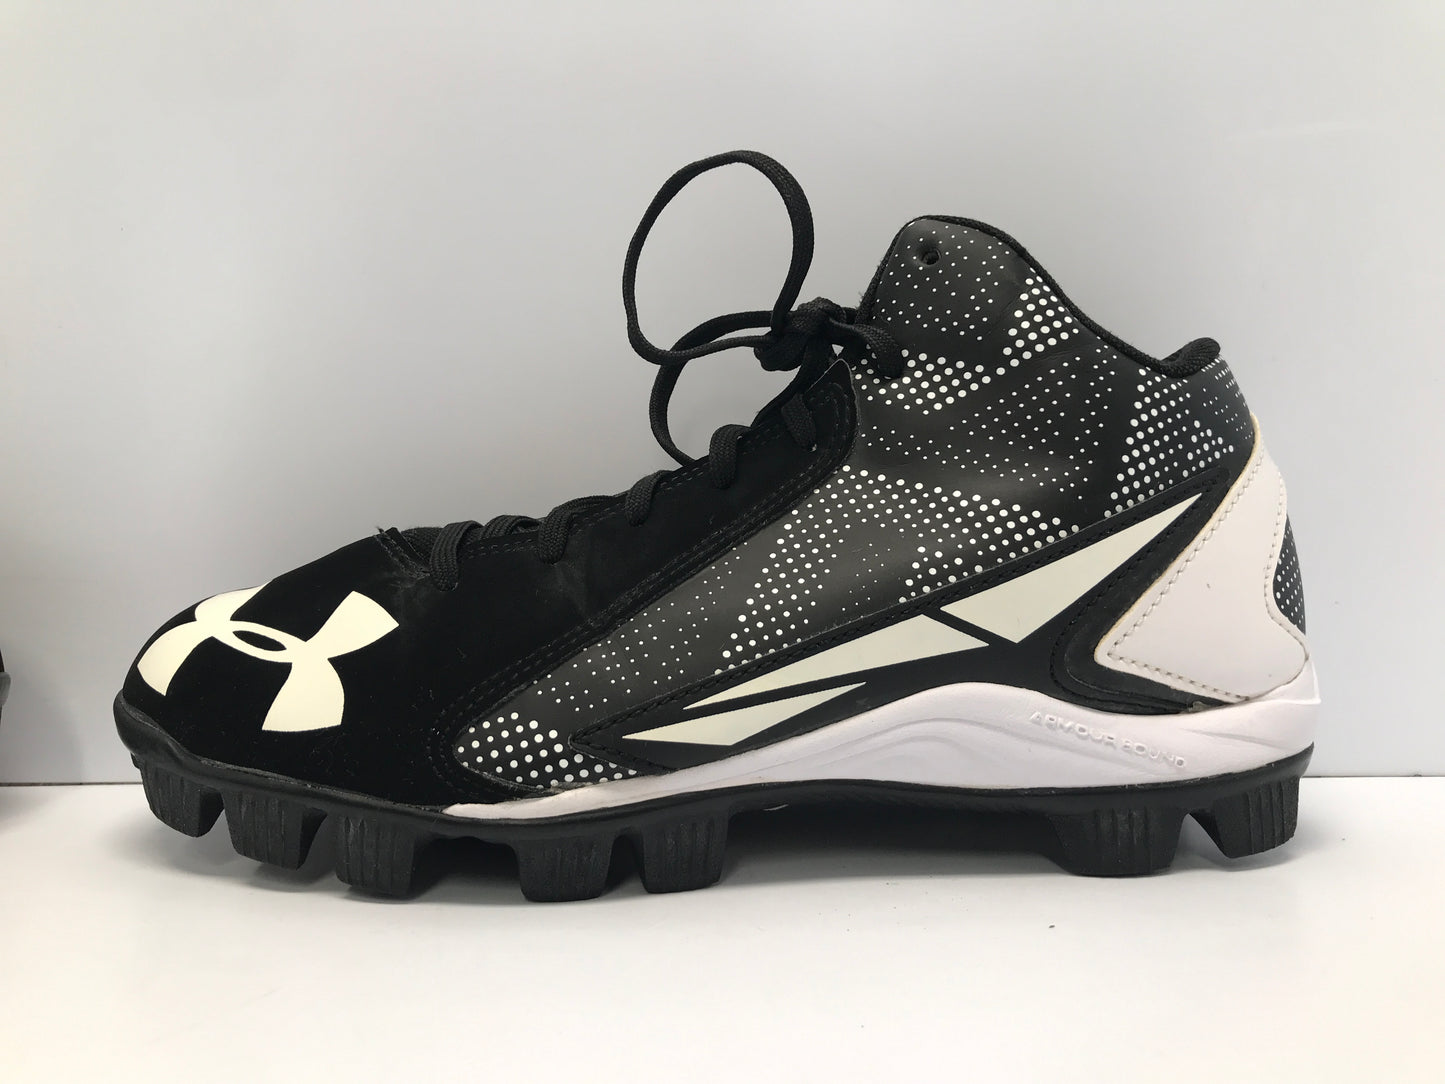 Baseball Shoes Cleats Child Size 5 Under Armour Black White Like New